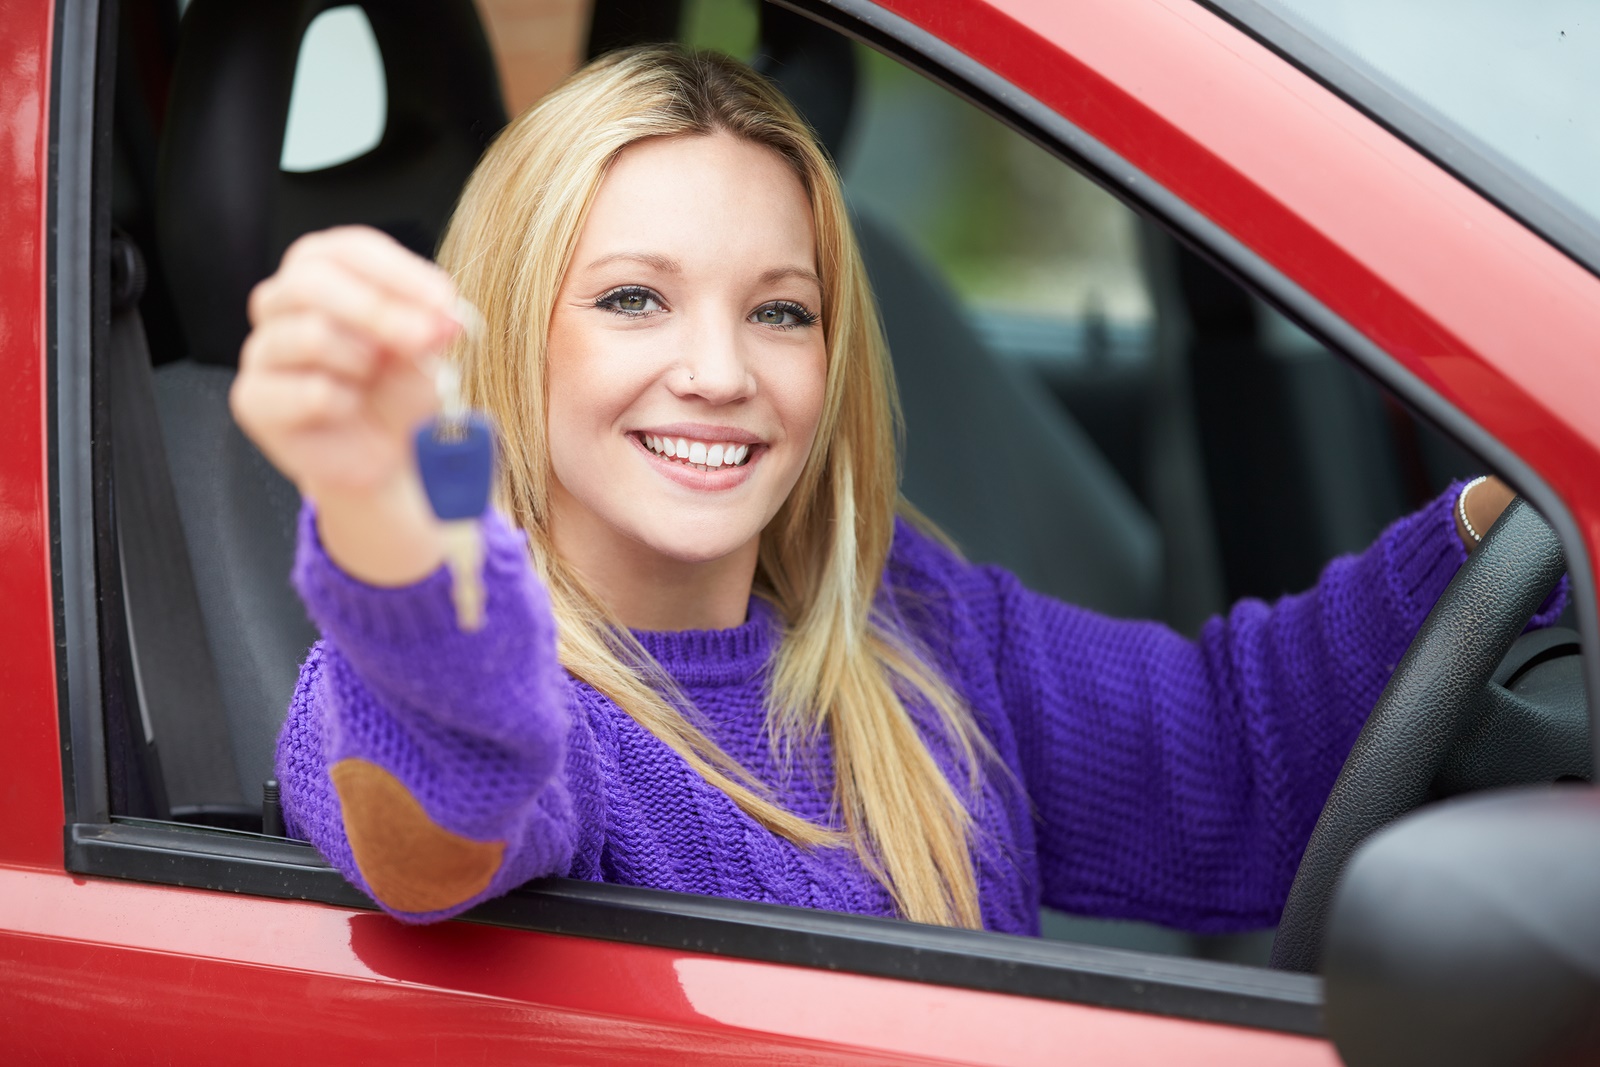 Car Insurance For College Students - Student Car Insurance Quotes With